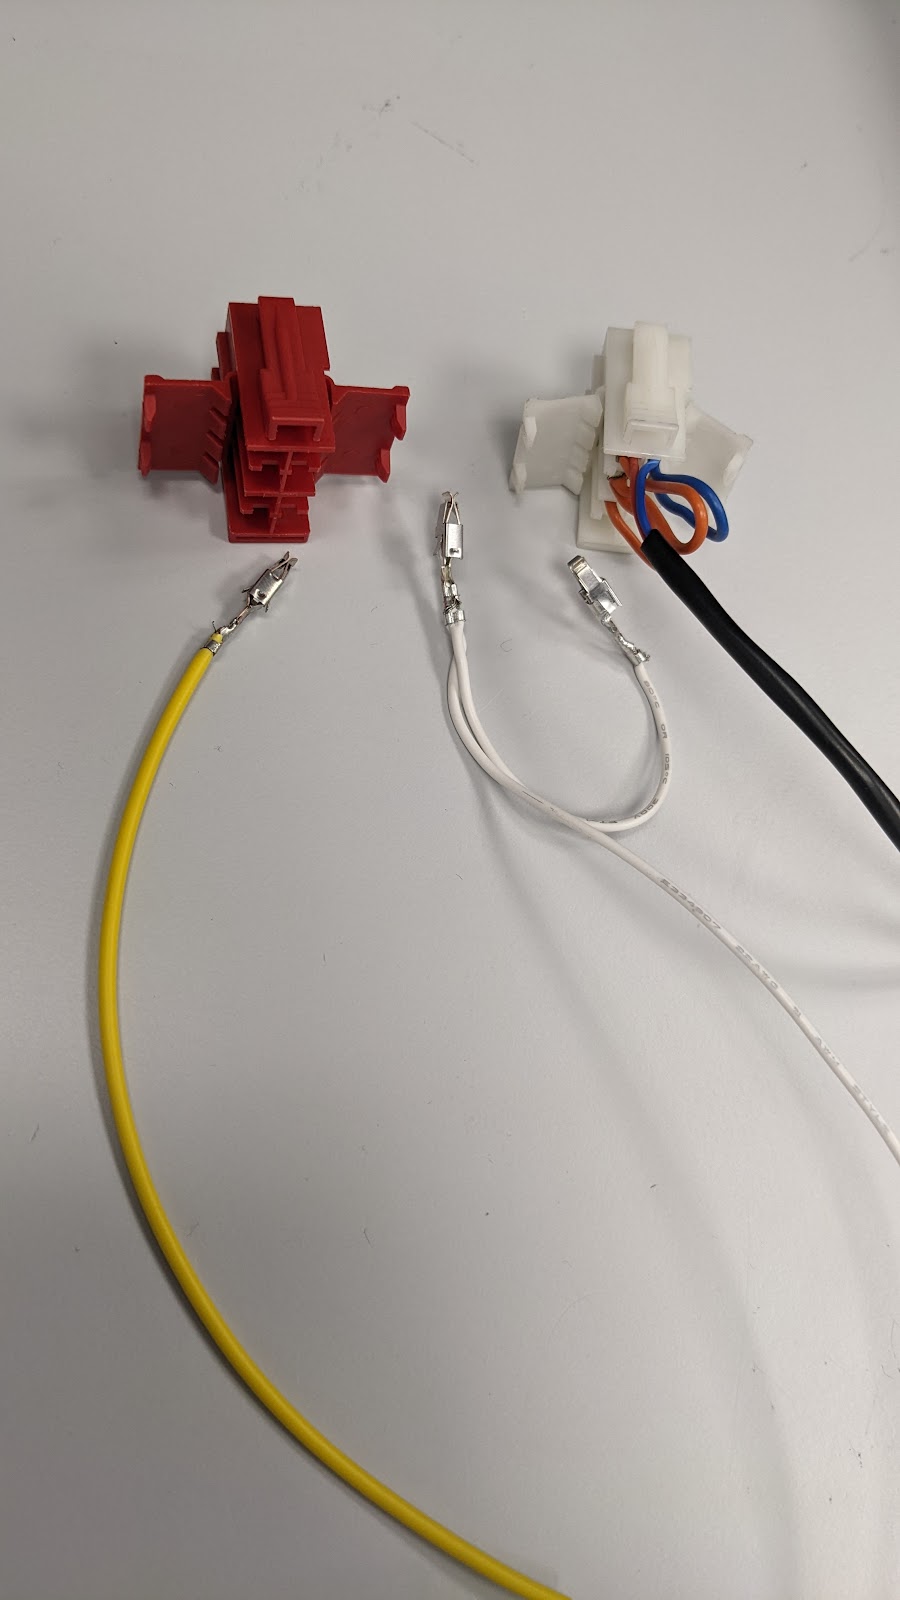 HRN-URTACHO red and white connectors